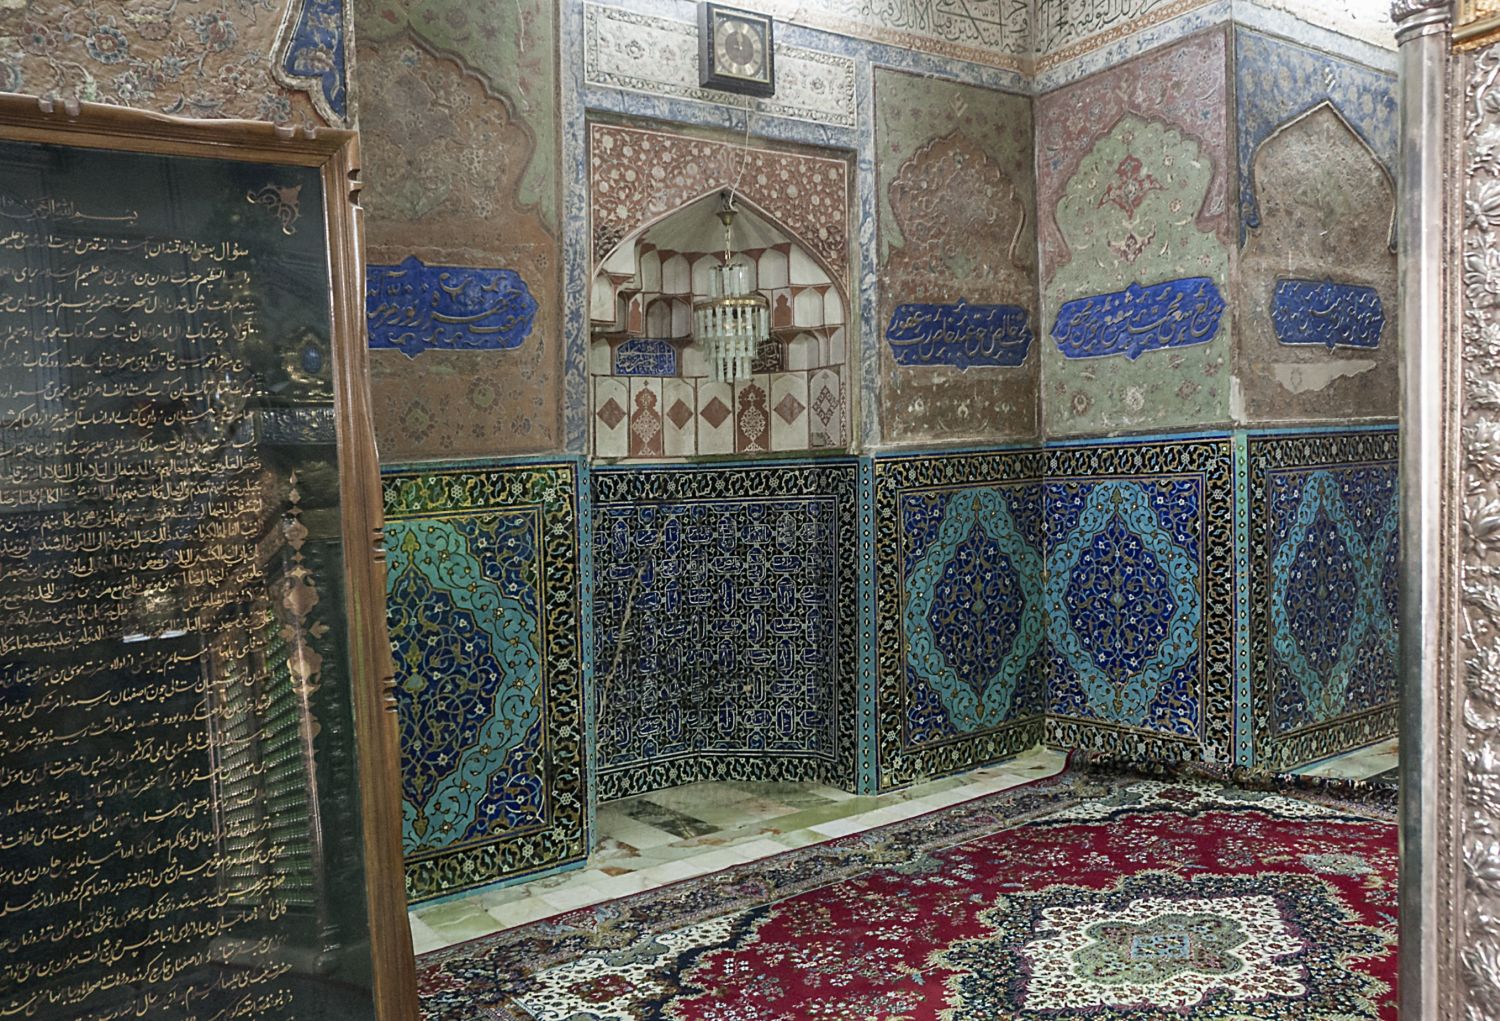 Inner tomb chamber, view of mihrab.